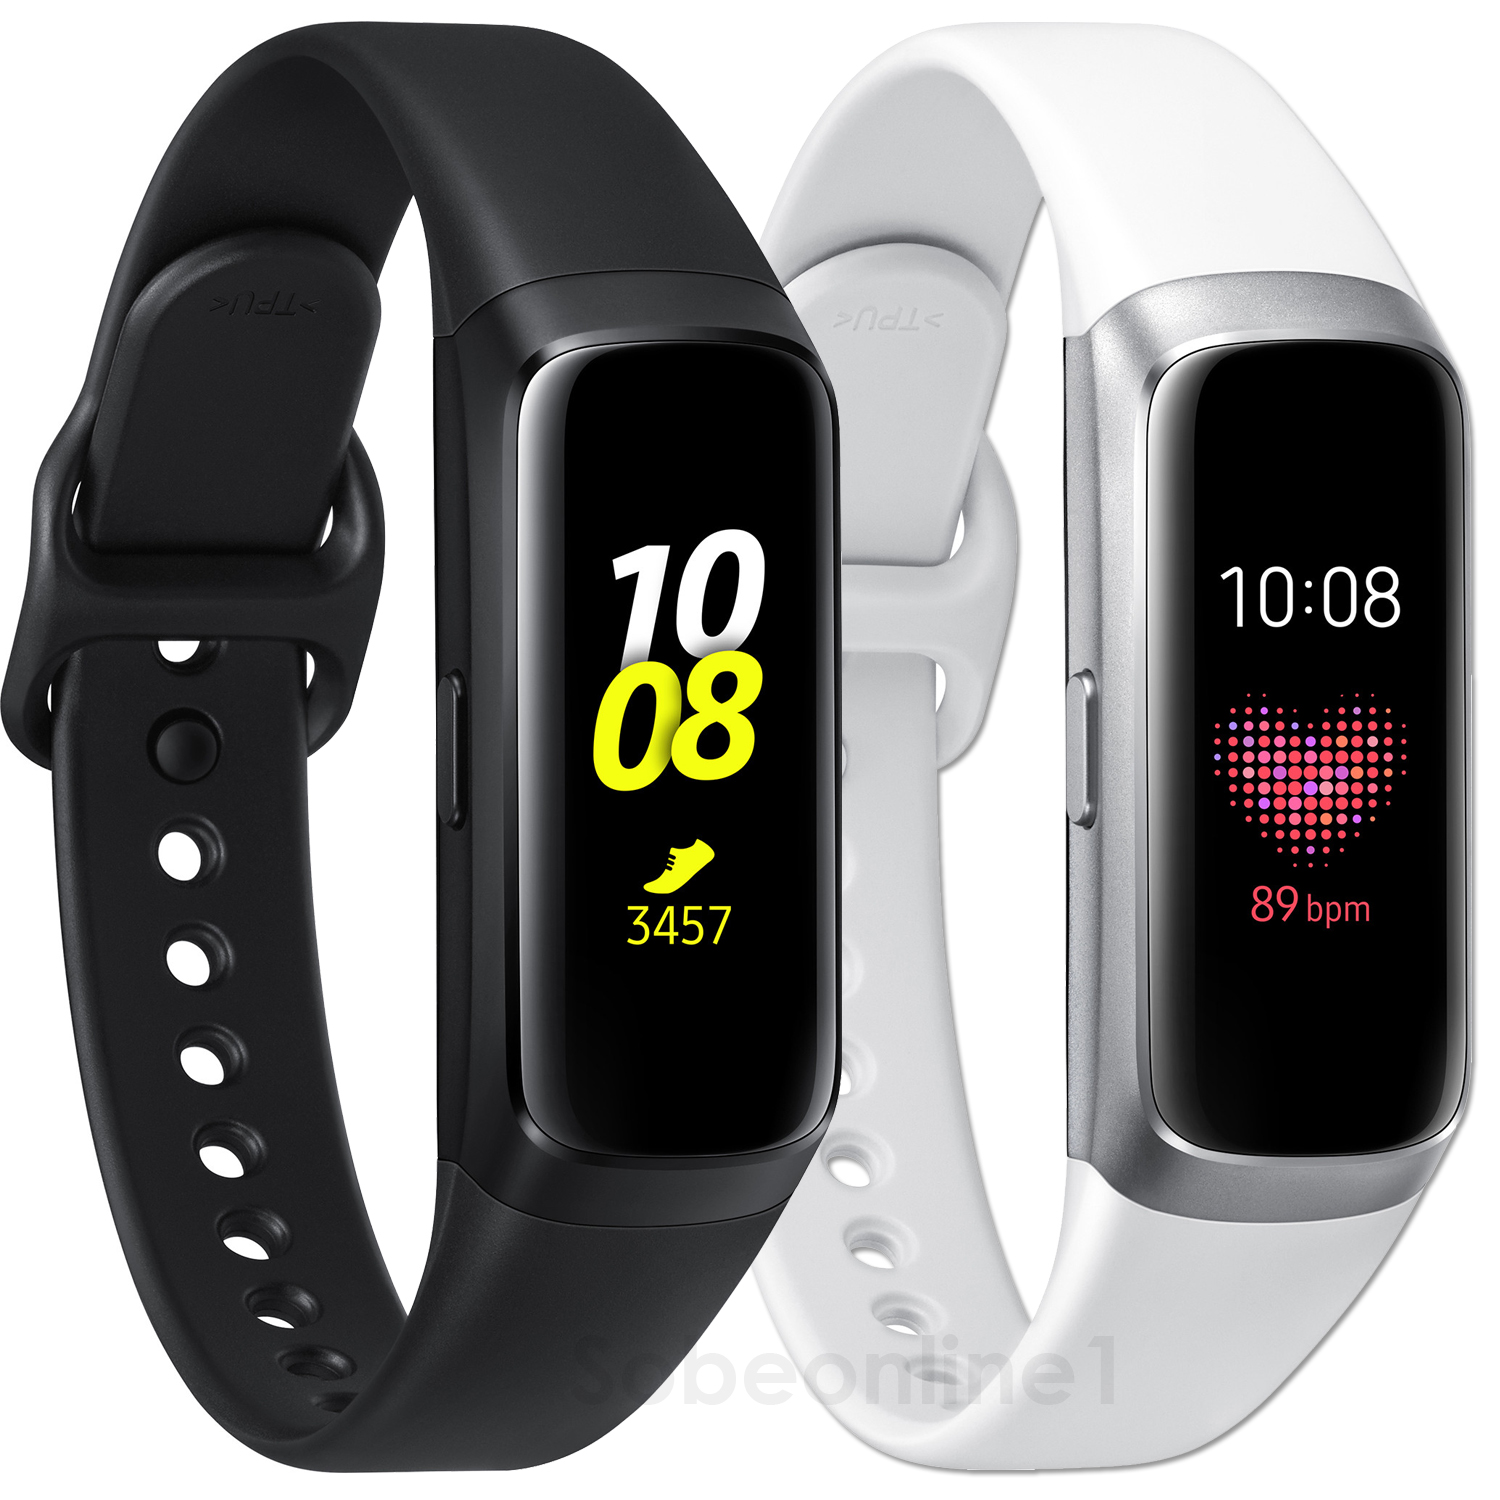 Samsung Galaxy Fit 370. Samsung Galaxy Fit SMARTWATCH. Самсунг галакси фит 0 95. Фитнес-браслет Samsung Galaxy Fit SM-r370. Galaxy fit 3 graphite